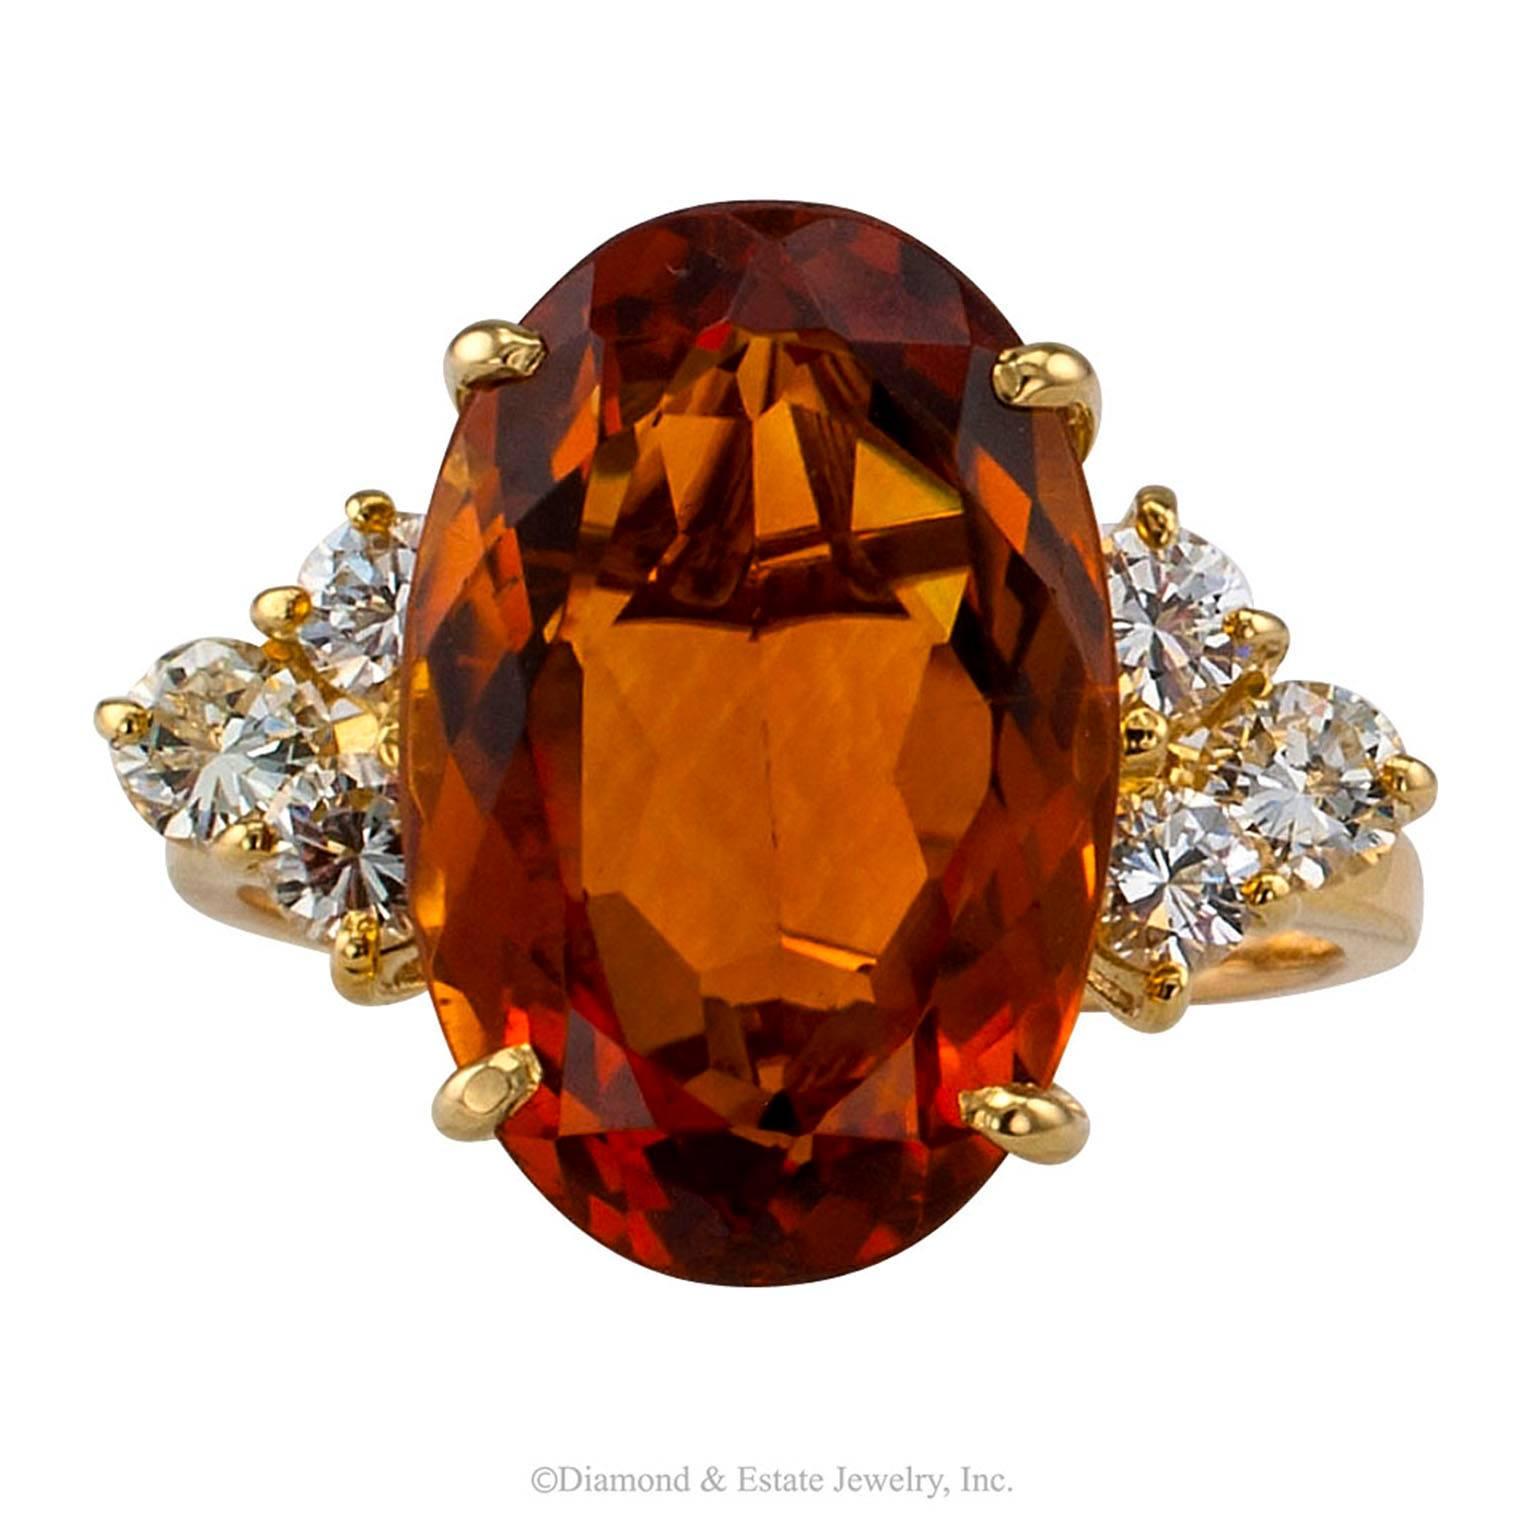 Madeira Citrine Diamond Gold Cocktail Ring

Madeira citrine gold and diamond cocktail ring.  The formidable design showcases a large, elongated oval citrine weighing approximately  7.50 carats, cuddled at the shoulders by round brilliant-cut diamond